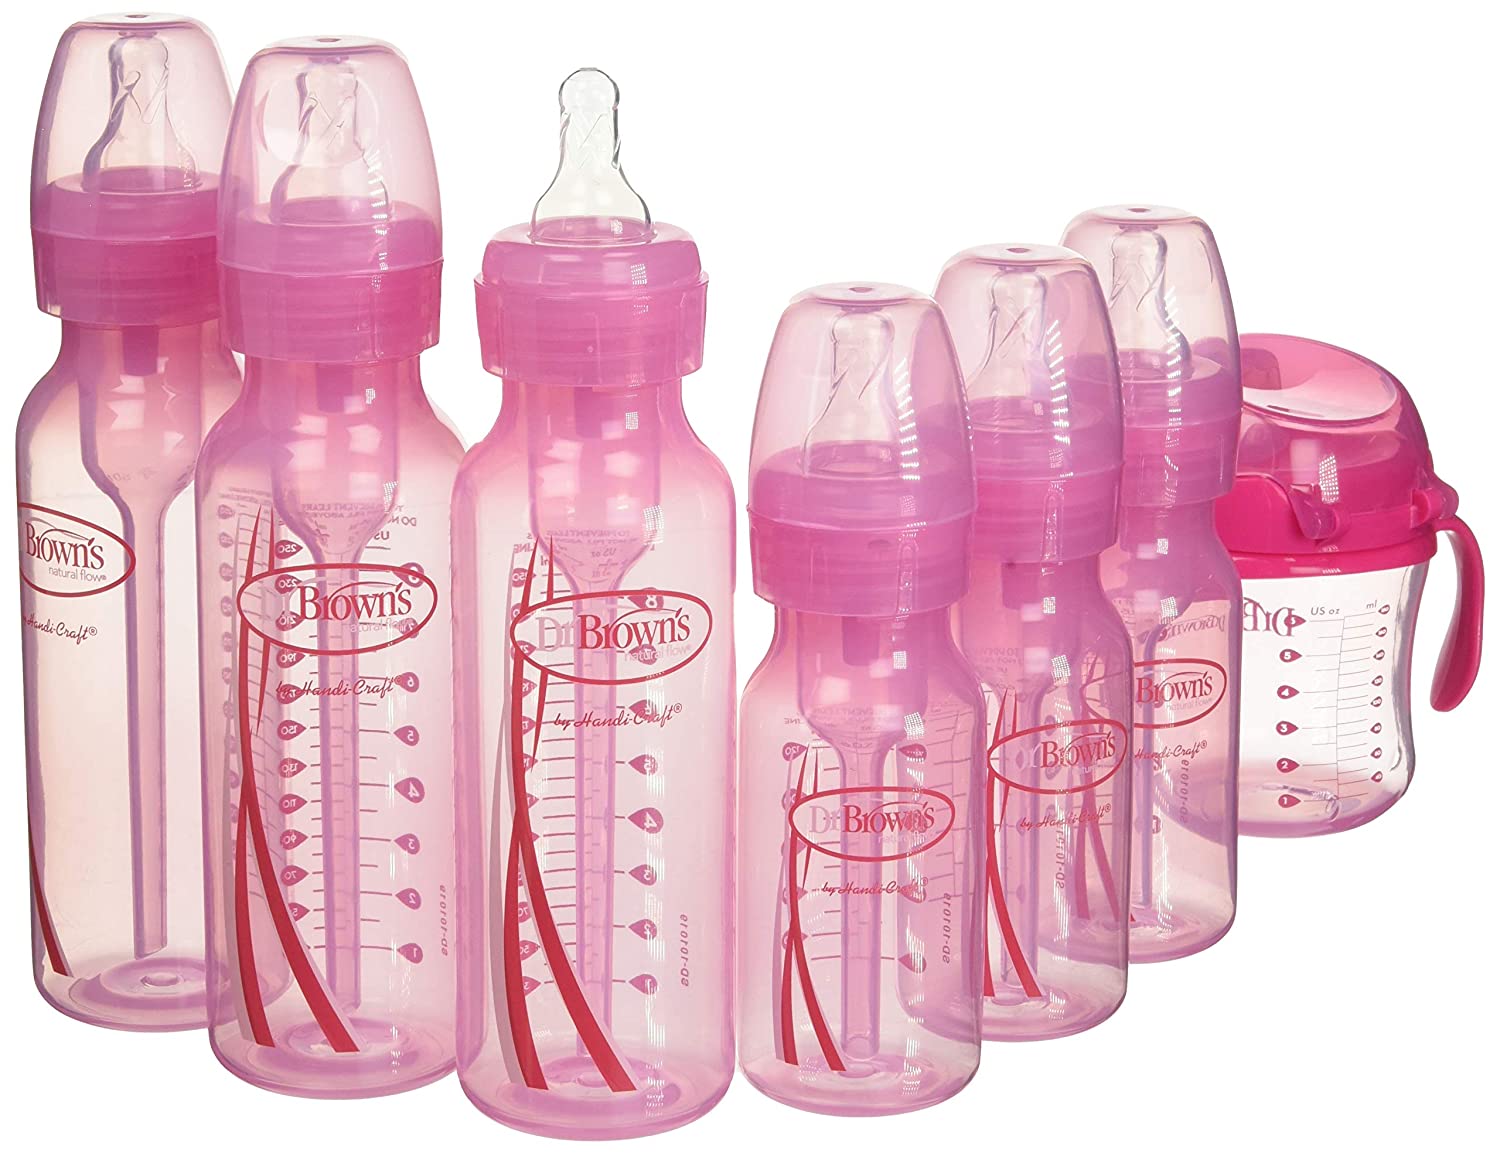 Dr. Brown's Options+ Baby Bottles Pink Gift Set with Silicone Teether